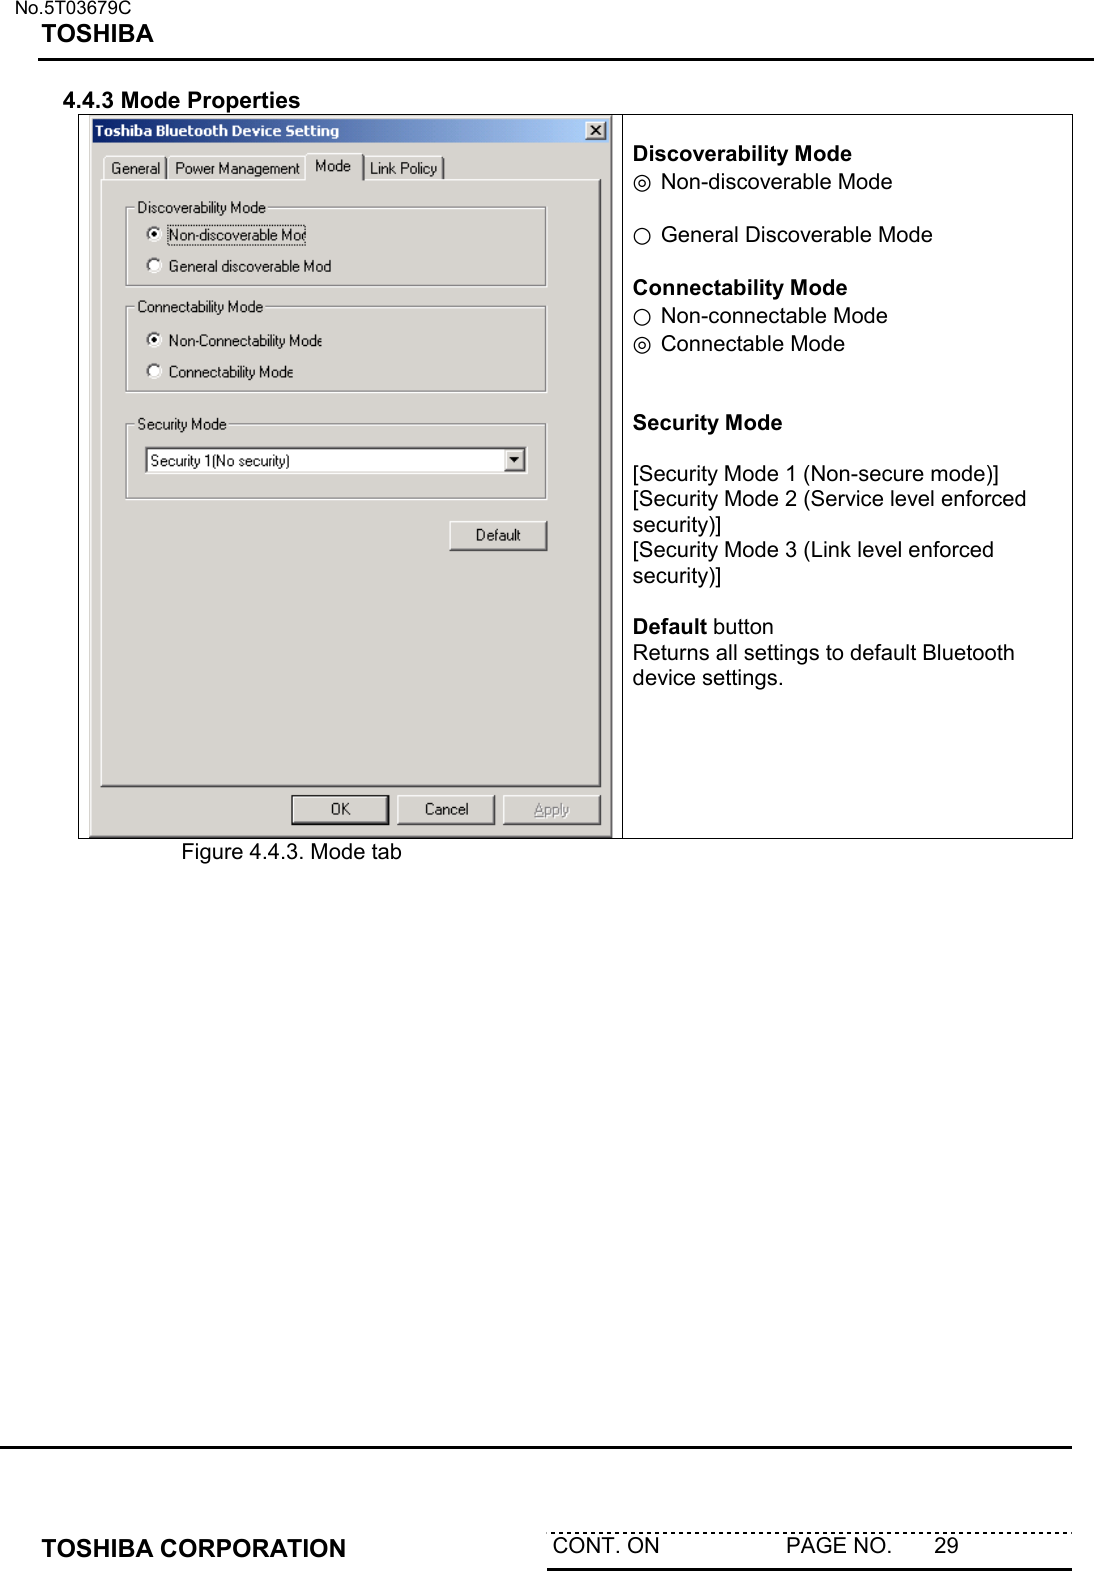   No.5T03679C TOSHIBA   TOSHIBA CORPORATION  CONT. ON                     PAGE NO.       29   4.4.3 Mode Properties   Discoverability Mode ◎ Non-discoverable Mode   ○ General Discoverable Mode  Connectability Mode ○ Non-connectable Mode ◎ Connectable Mode   Security Mode  [Security Mode 1 (Non-secure mode)] [Security Mode 2 (Service level enforced security)] [Security Mode 3 (Link level enforced security)]  Default button Returns all settings to default Bluetooth device settings.     Figure 4.4.3. Mode tab  